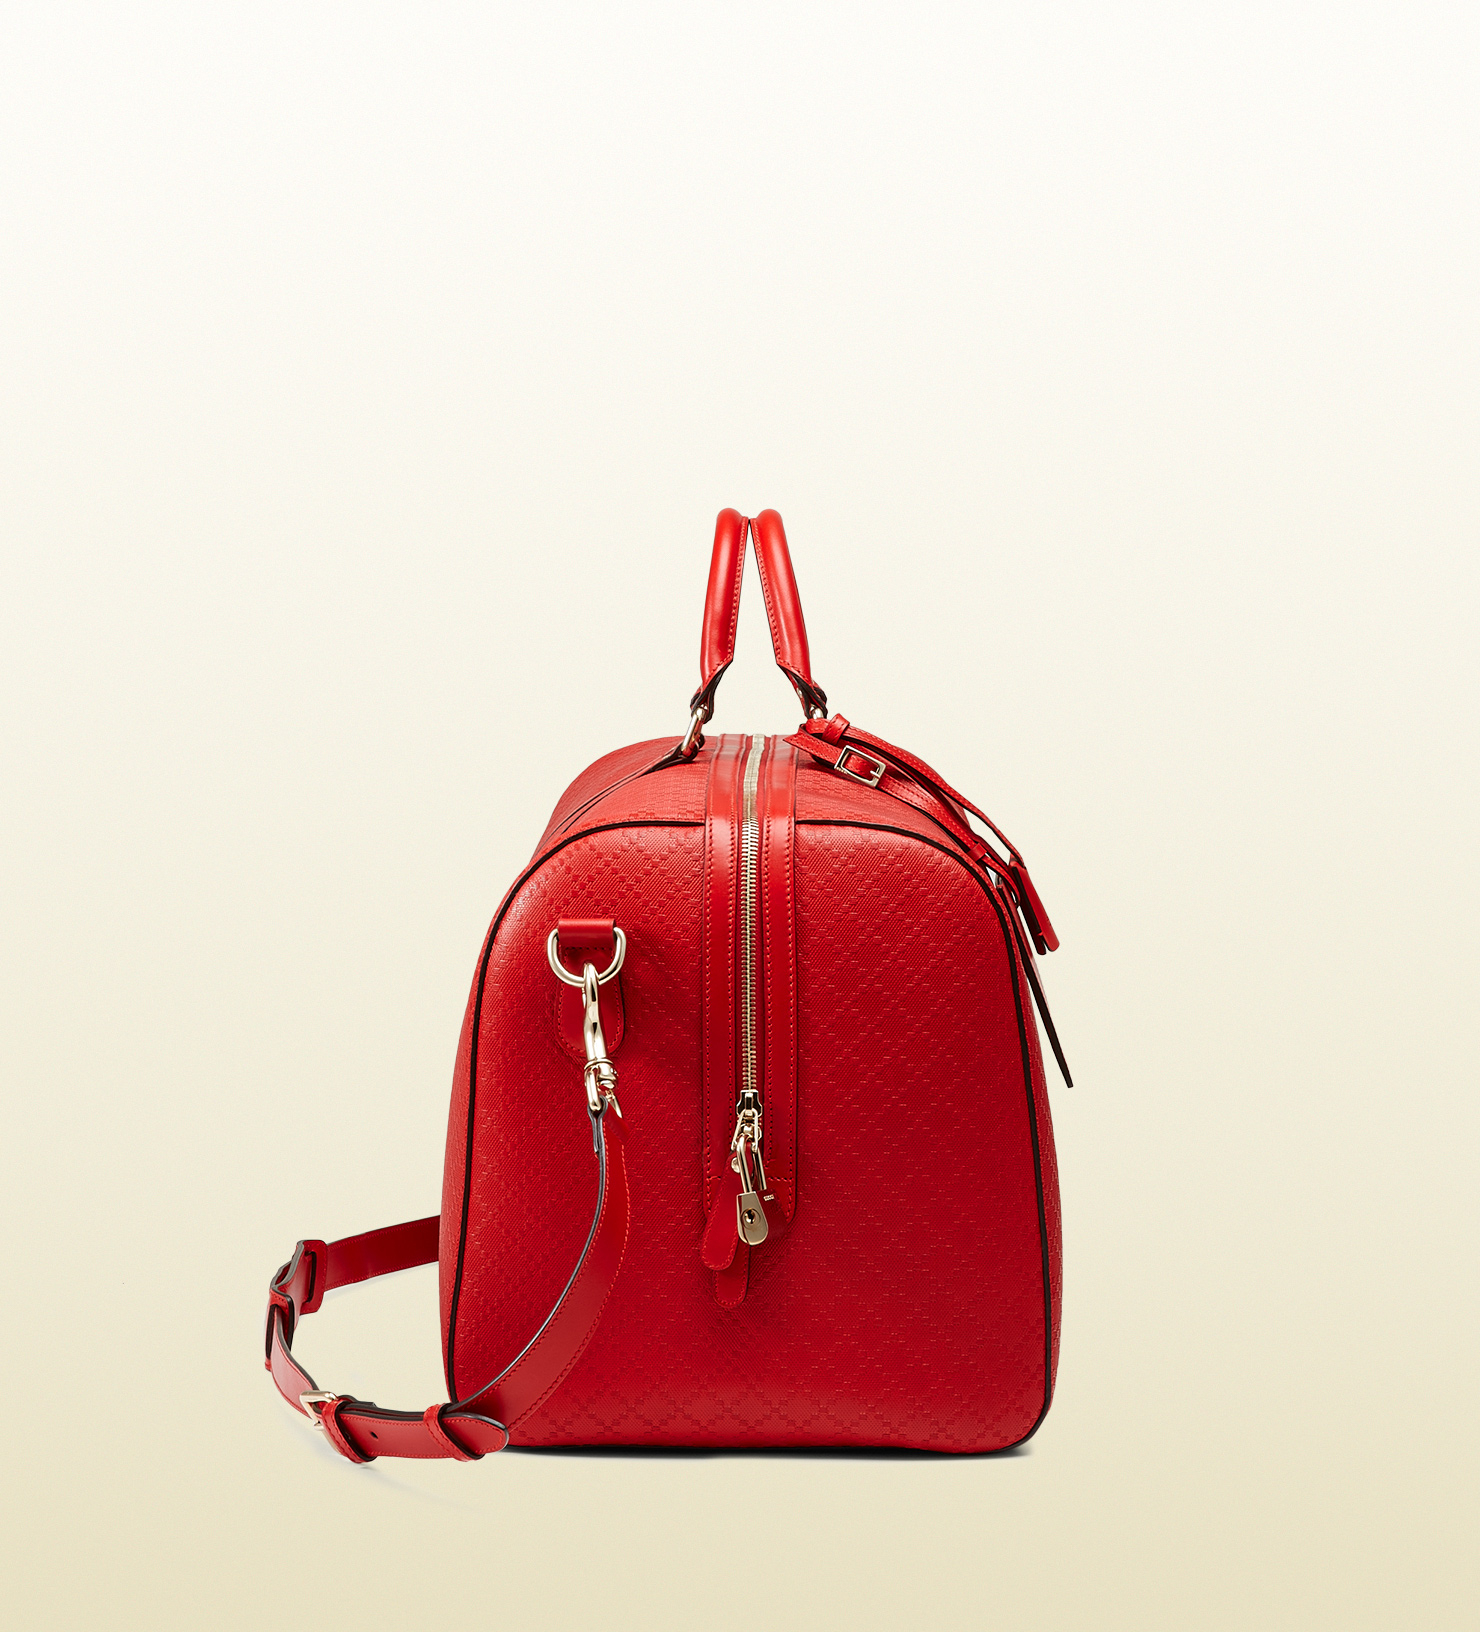 Gucci Bright Diamante Leather Carry-on Duffle Bag in Red | Lyst